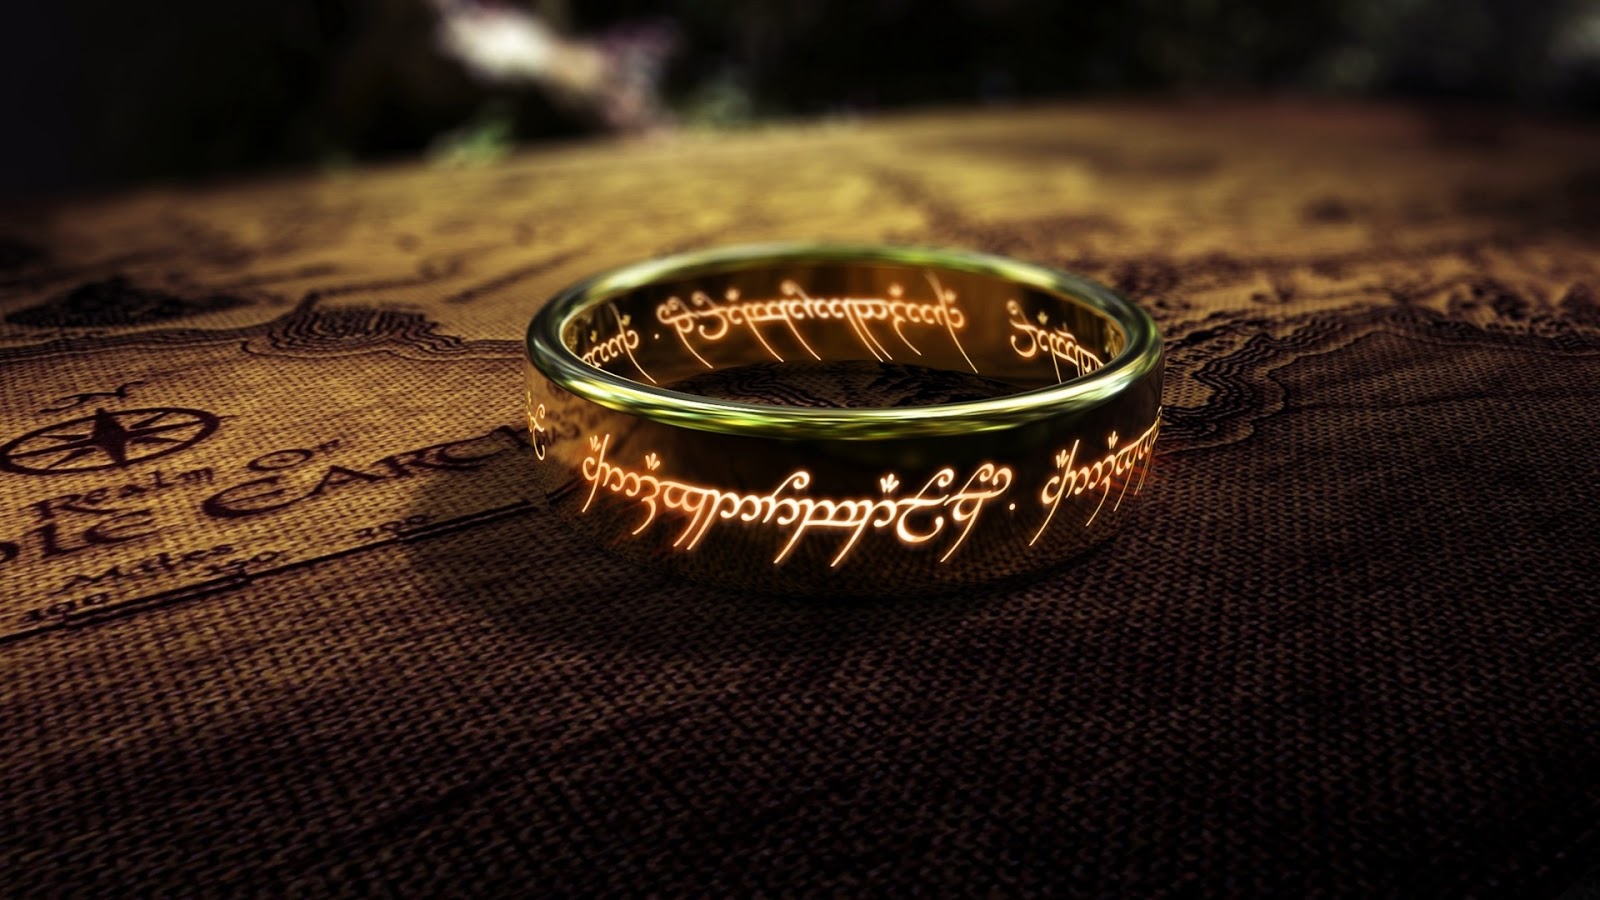 The Lord Of Rings Wallpaper For Desktop And Mac